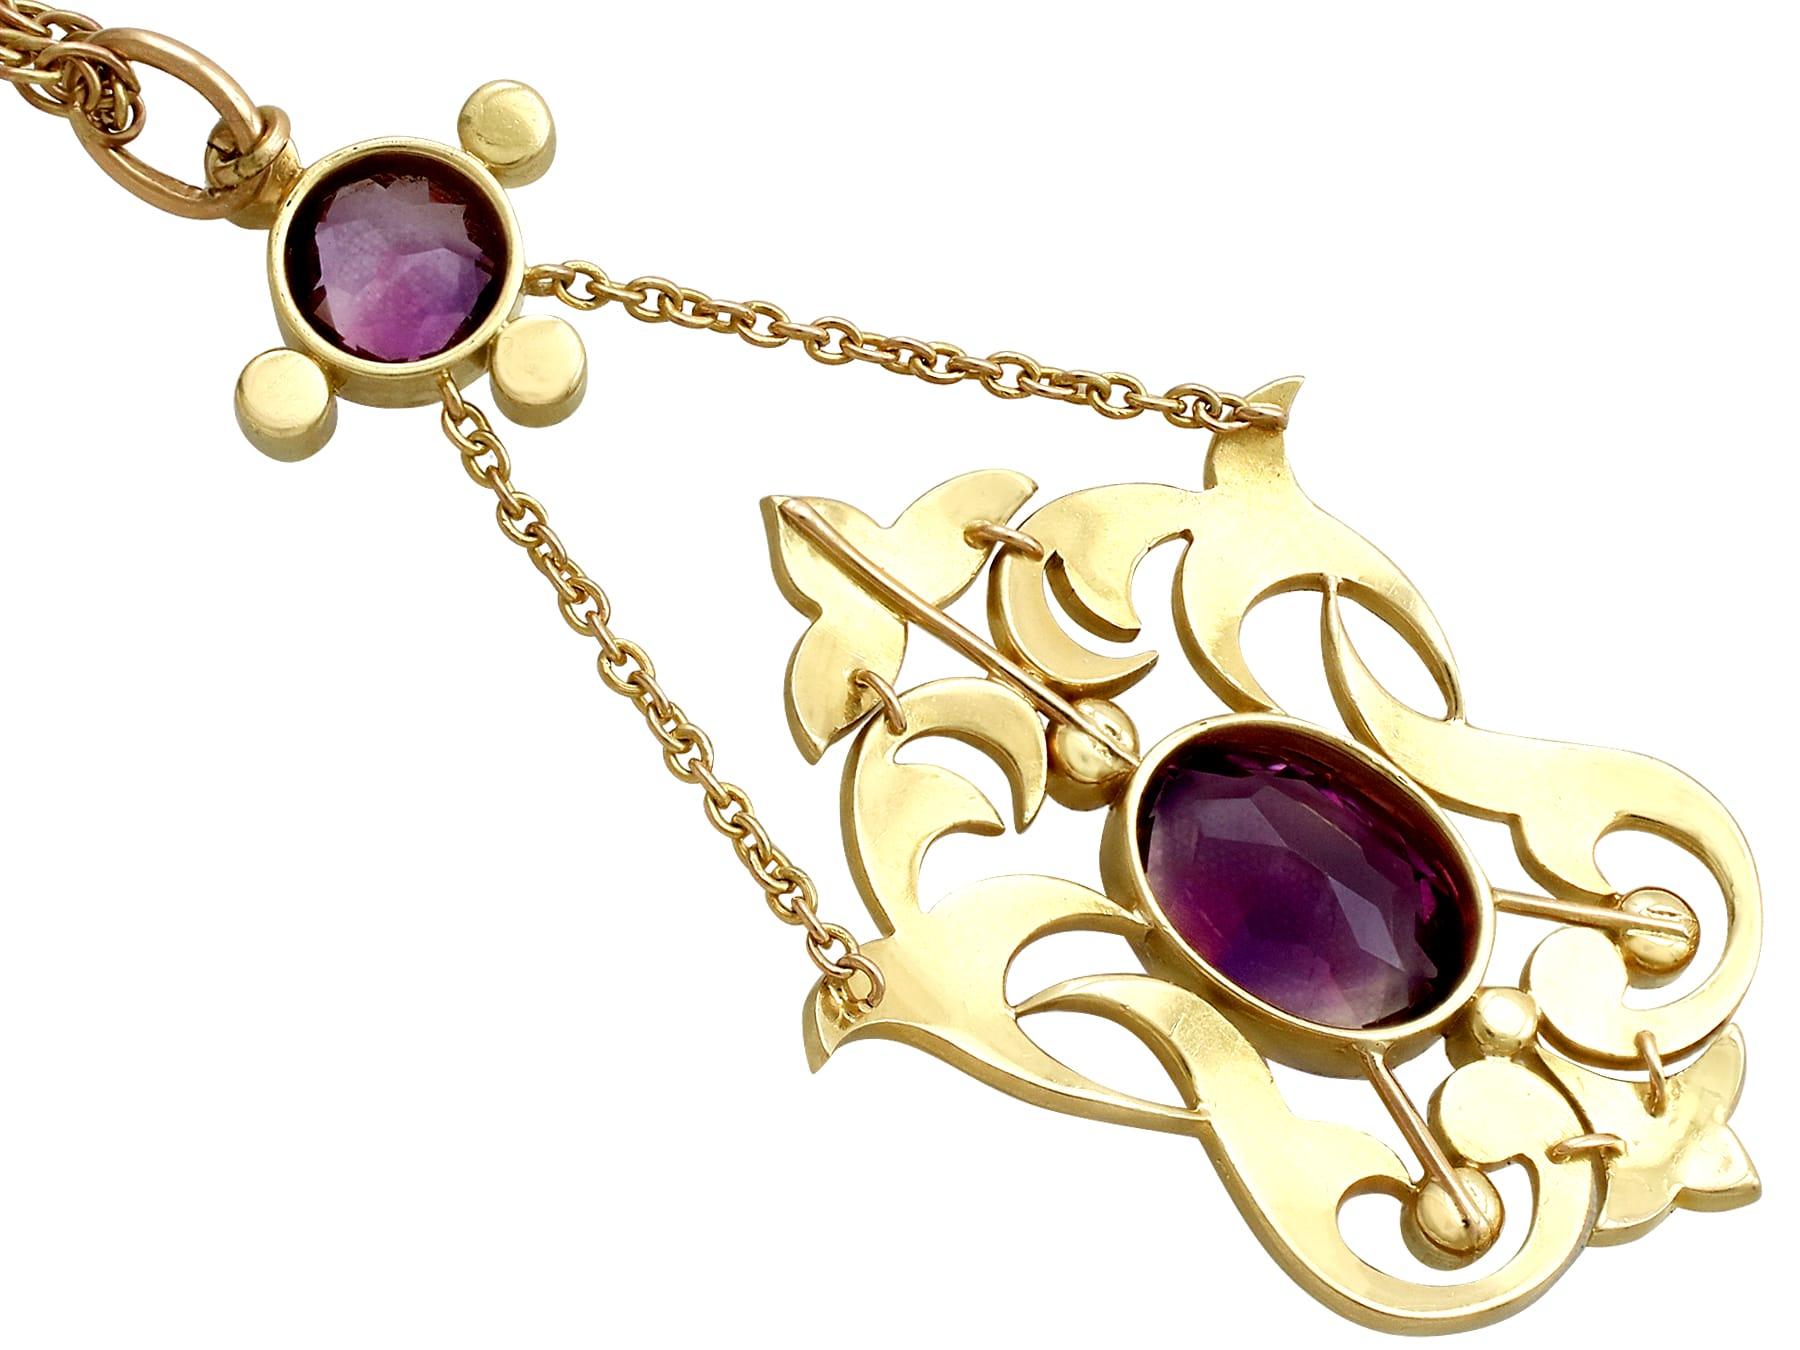 Antique 1910s 4.83 Carat Amethyst and Pearl Yellow Gold Pendant In Excellent Condition For Sale In Jesmond, Newcastle Upon Tyne